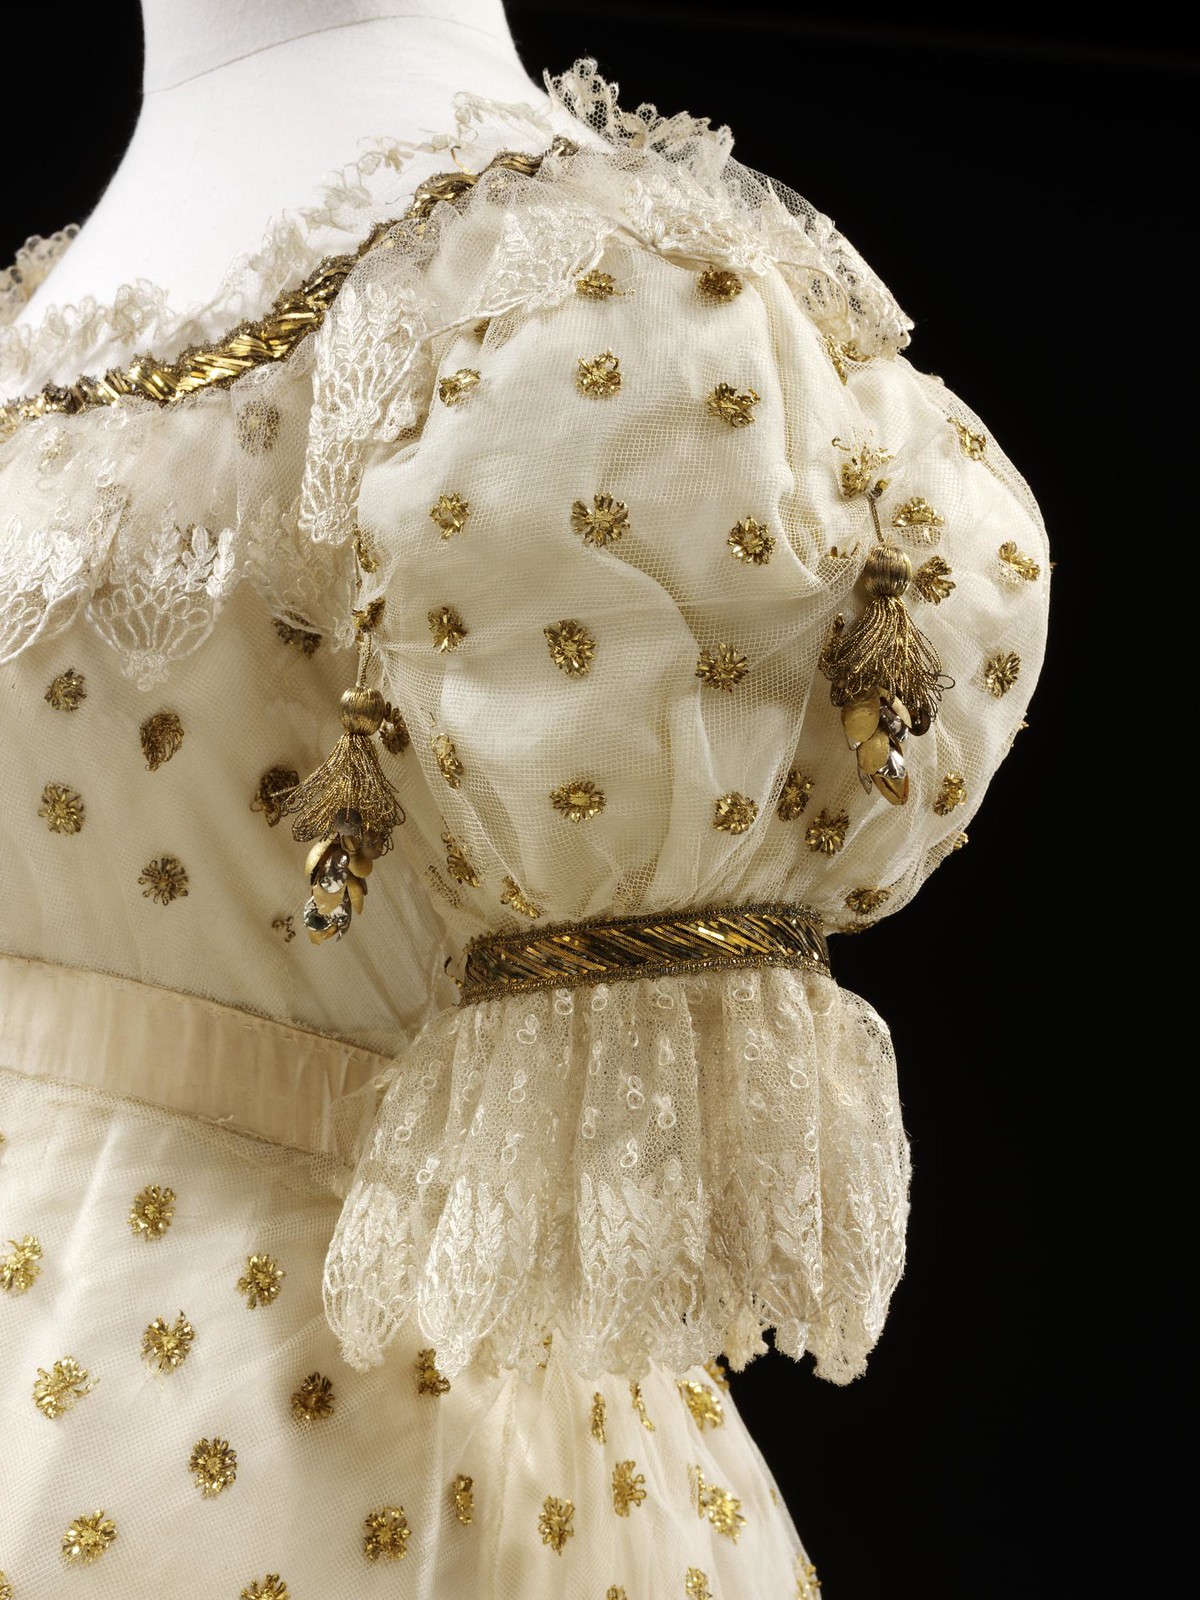 1820 Ball gown. British. Silk satin and silk embroidered with metal. © Victoria and Albert Museum, London